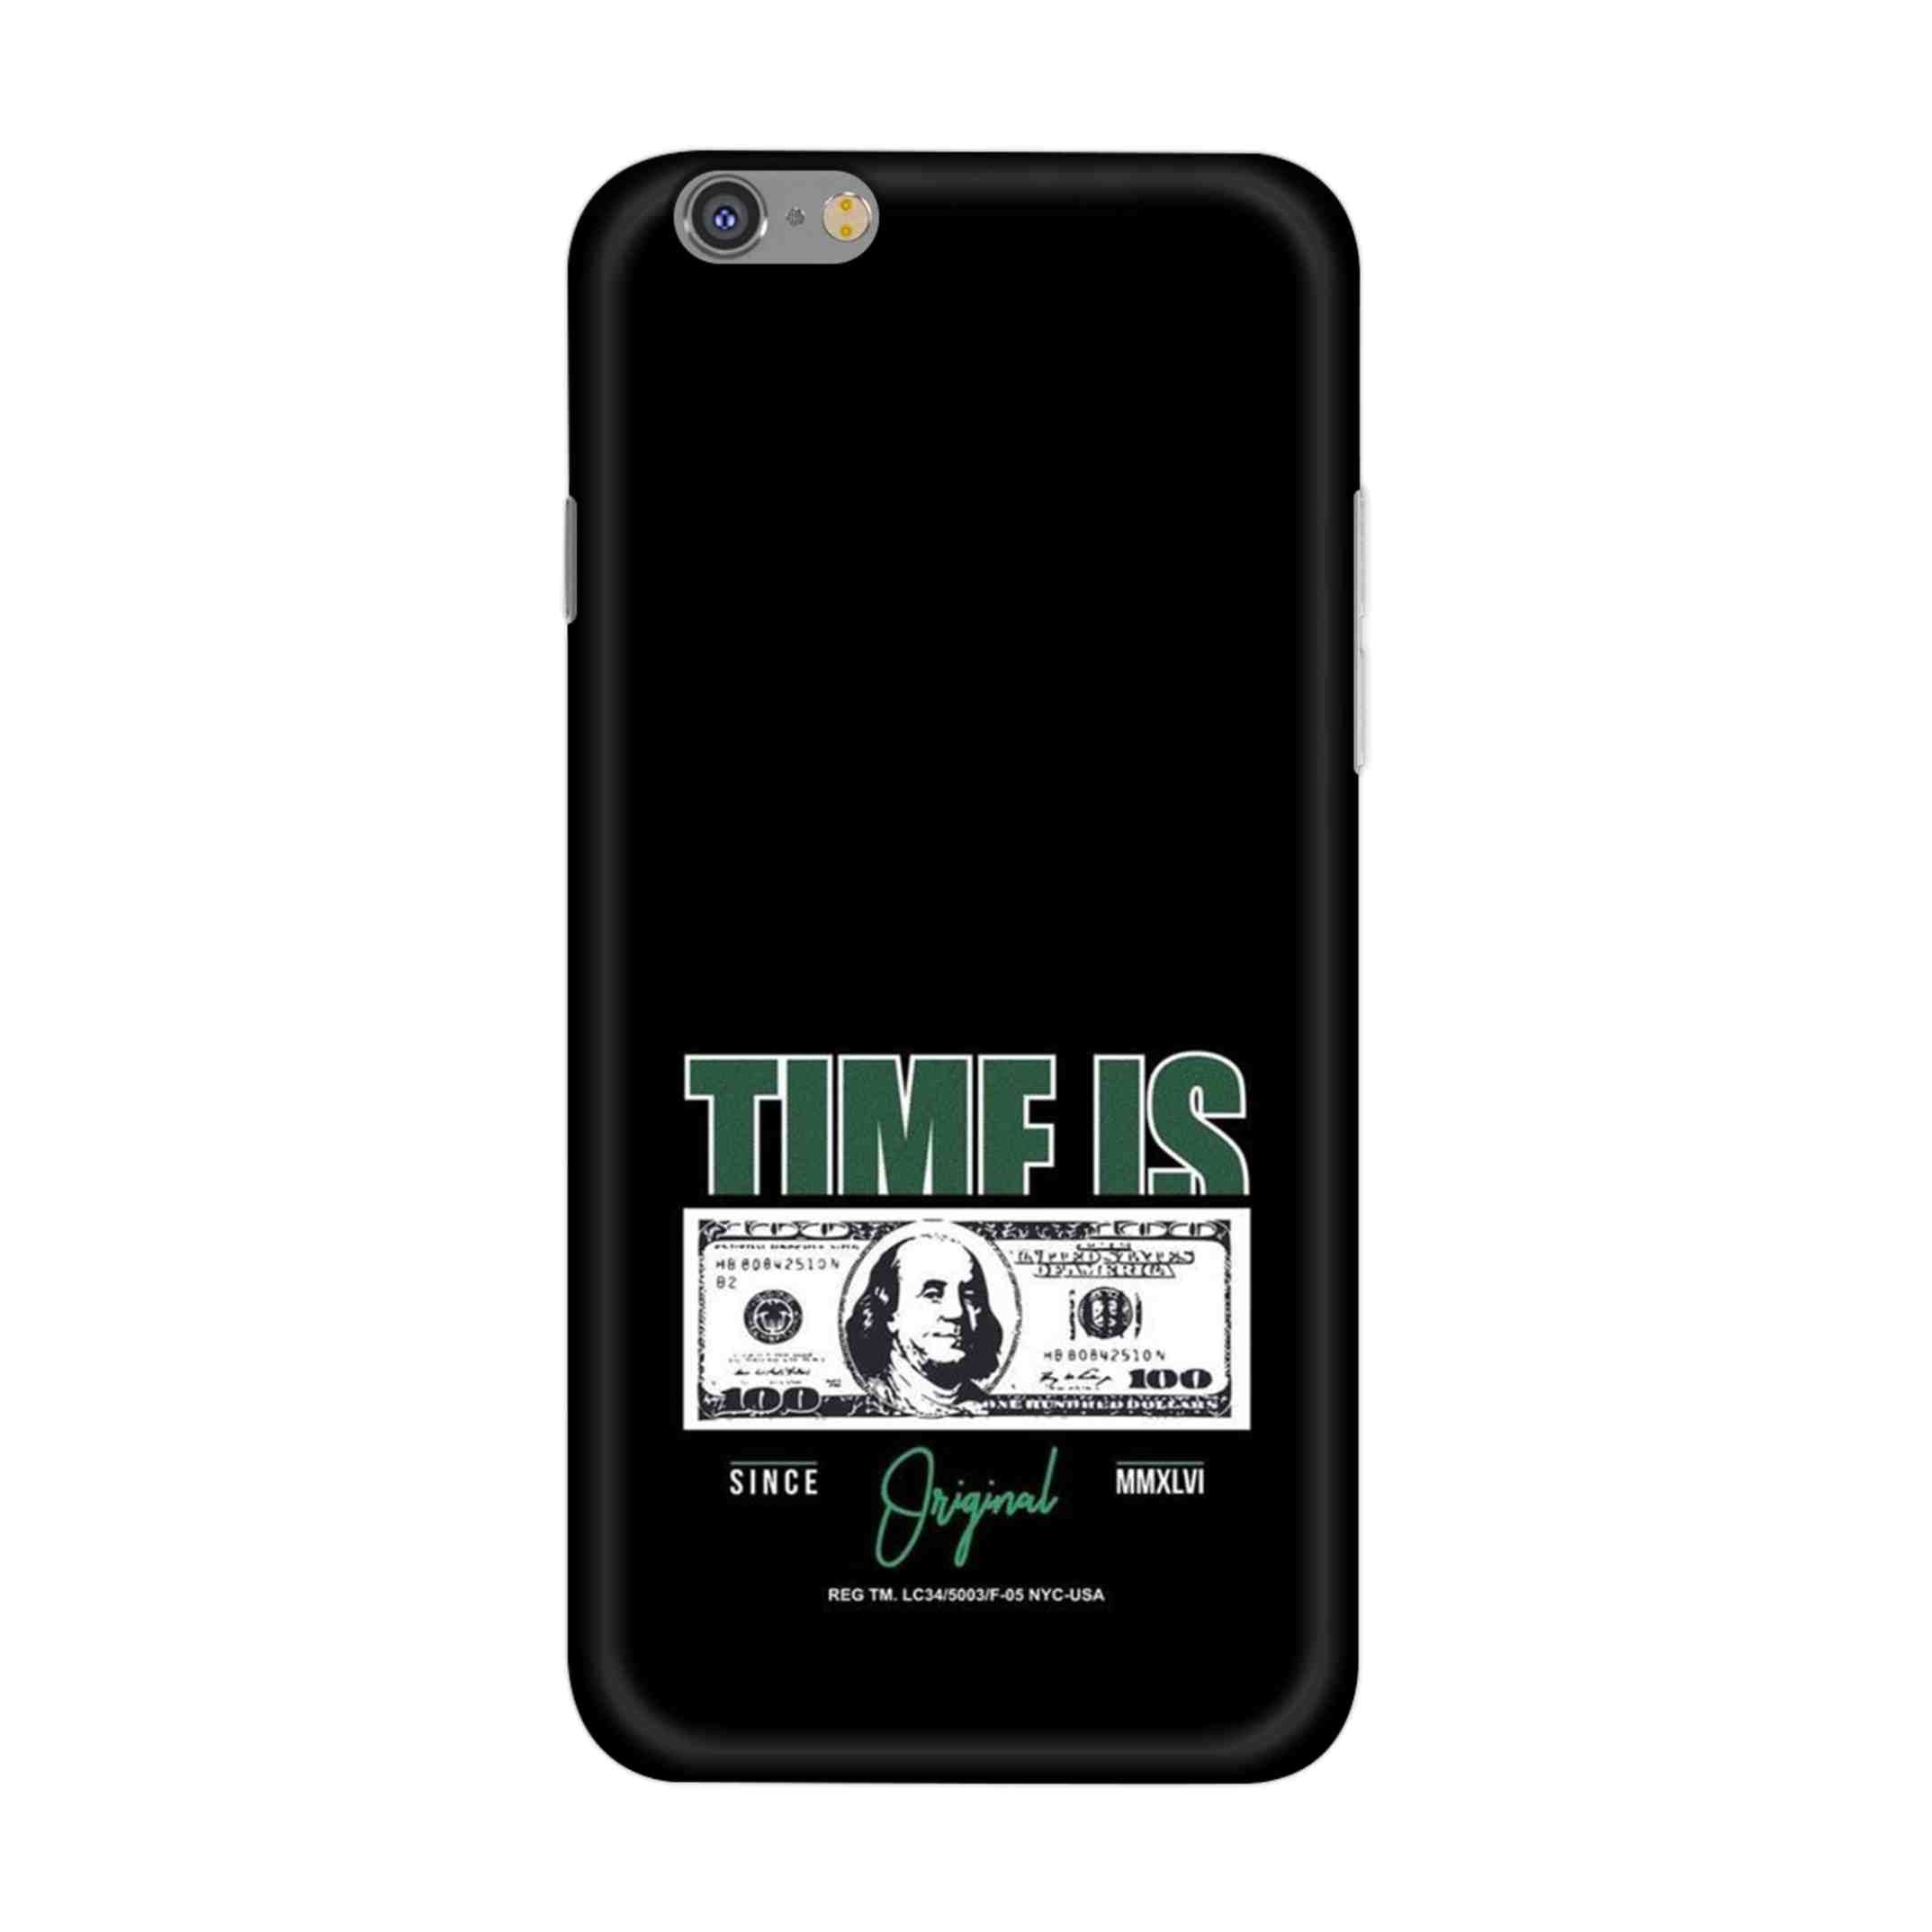 Buy Time Is Money Hard Back Mobile Phone Case/Cover For iPhone 6 Plus / 6s Plus Online